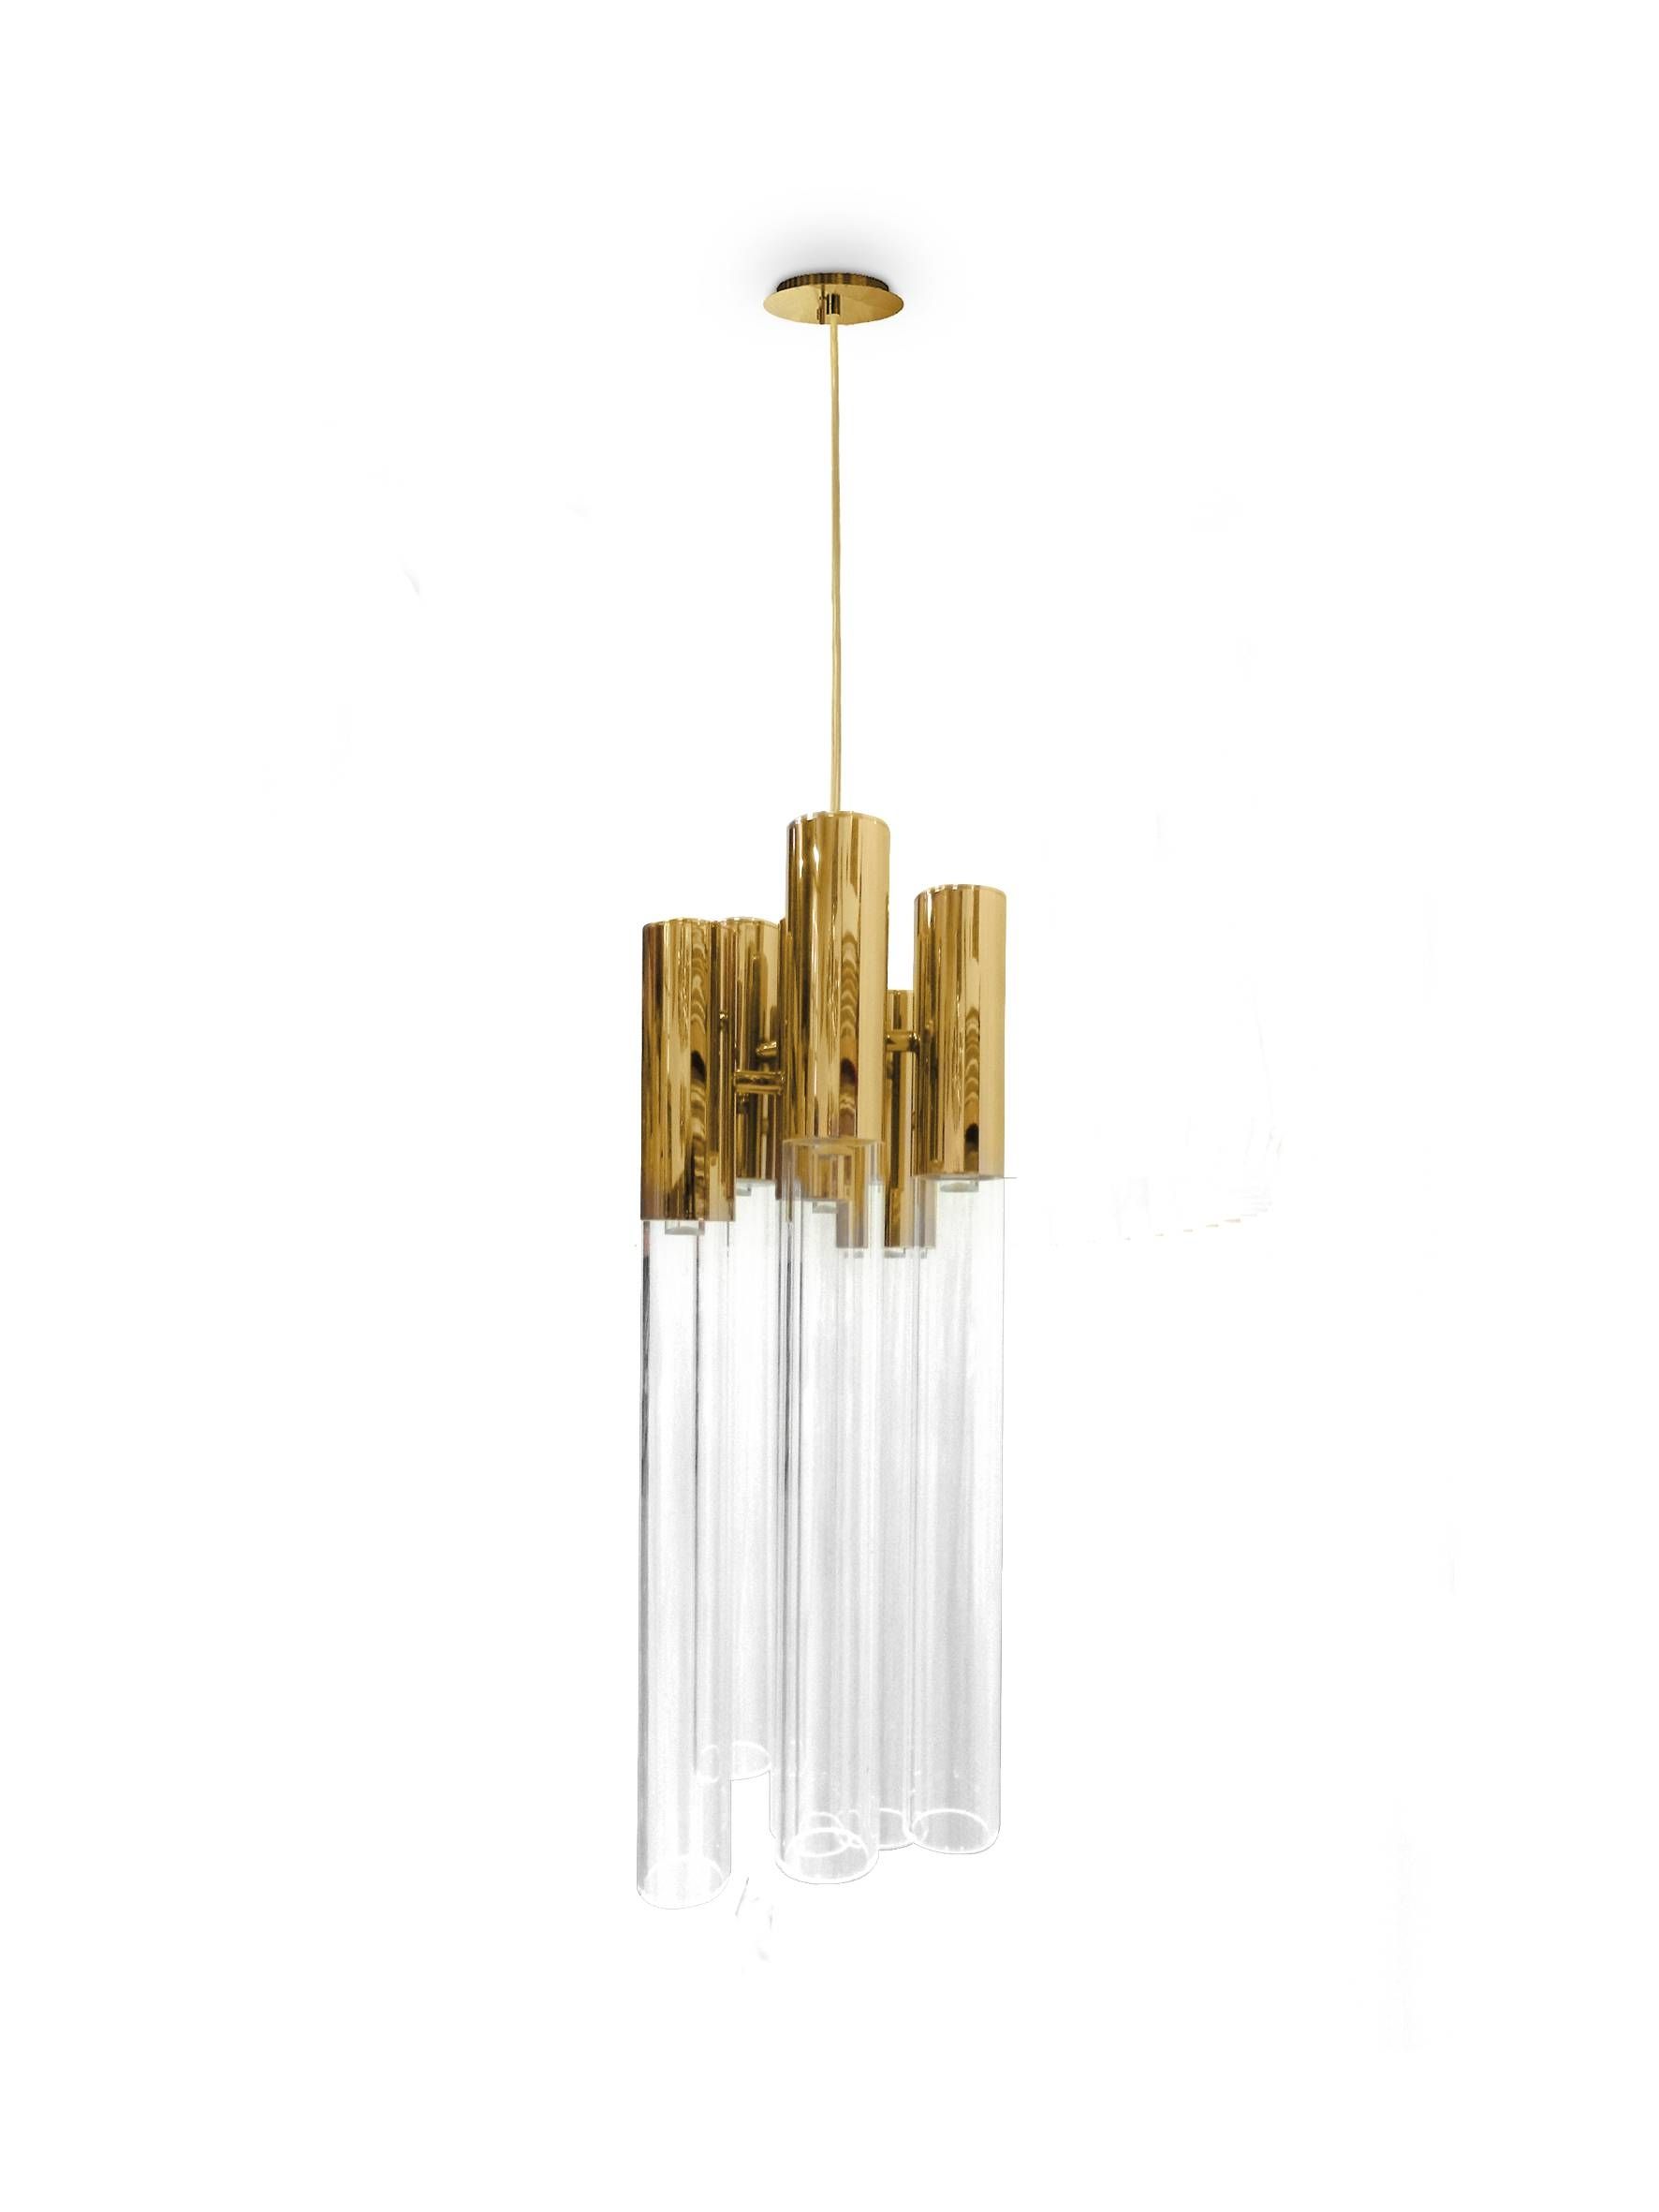 Luxury Design: Pendant Light Solutions For A Confortable Ambient For Luxury Pendant Lighting (View 9 of 15)